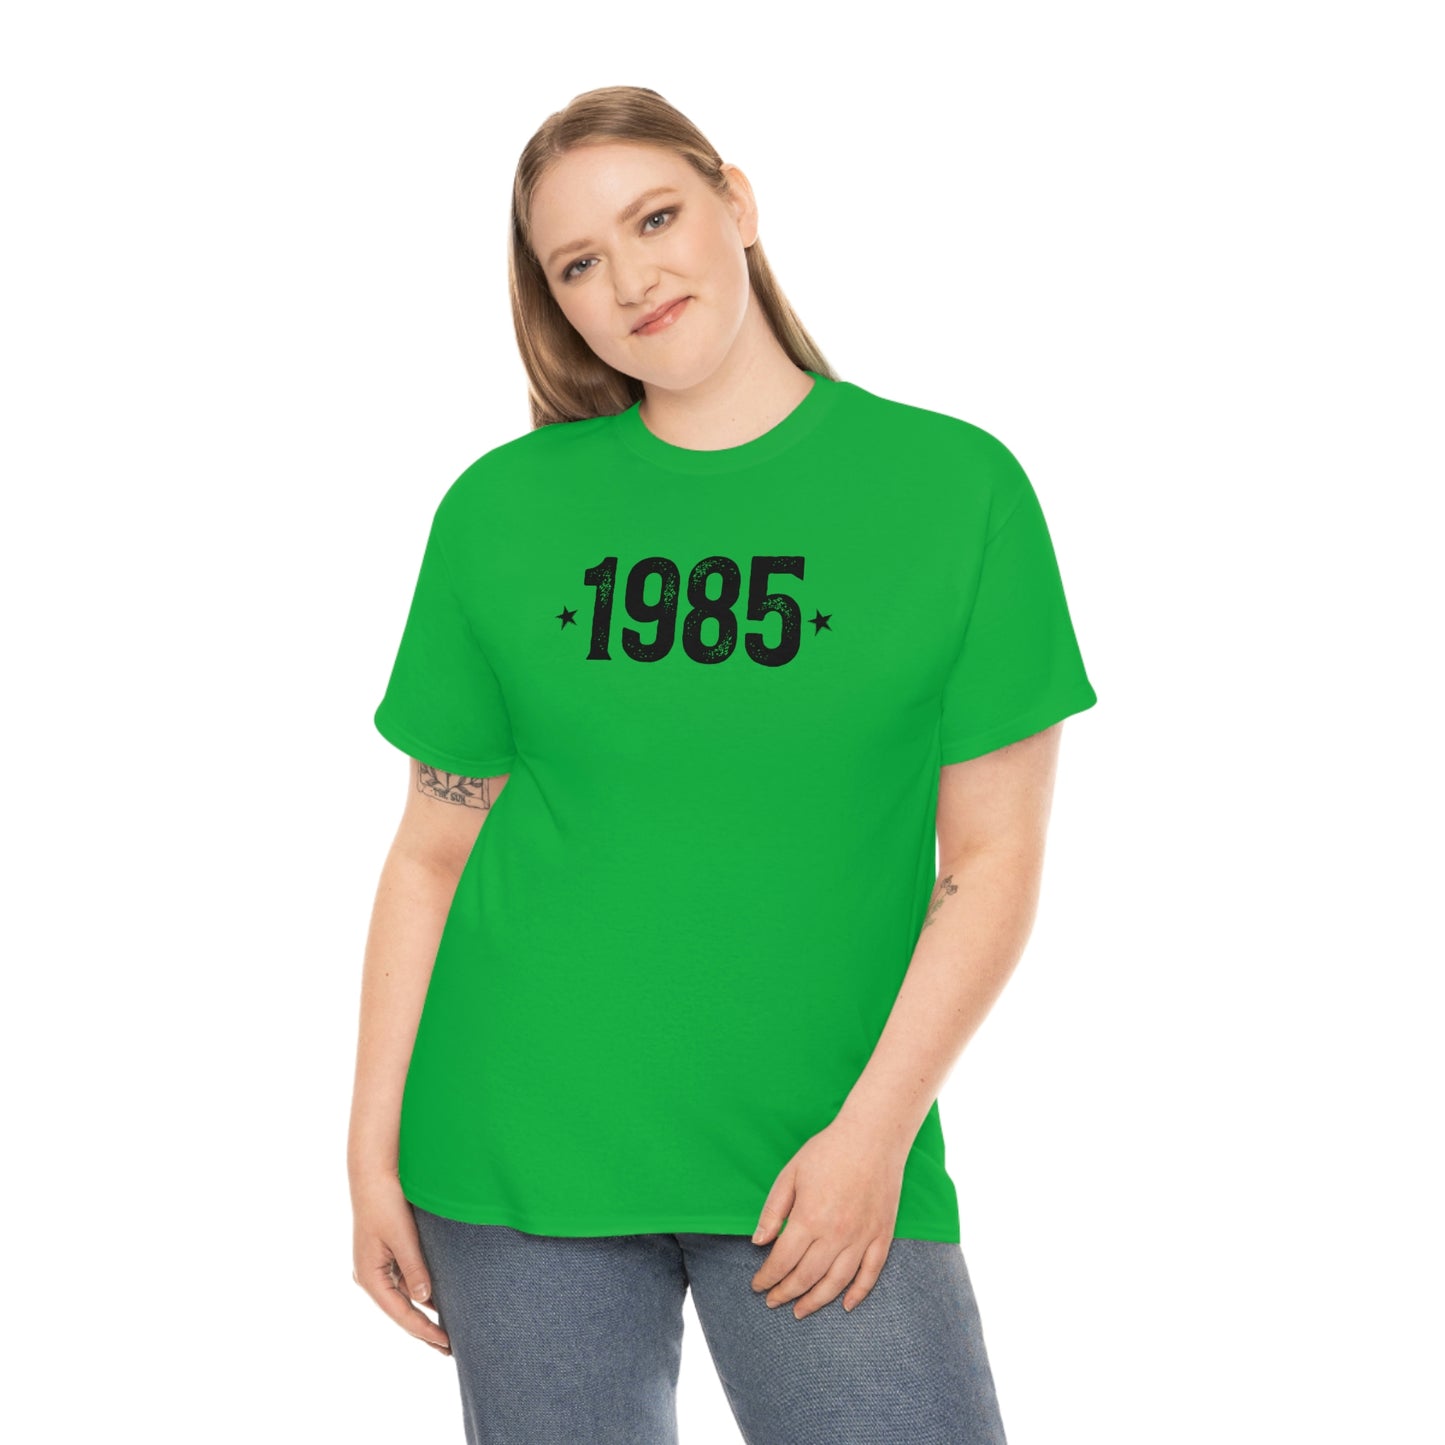 High-quality 1985 year commemorative t-shirt, perfect for casual fashion